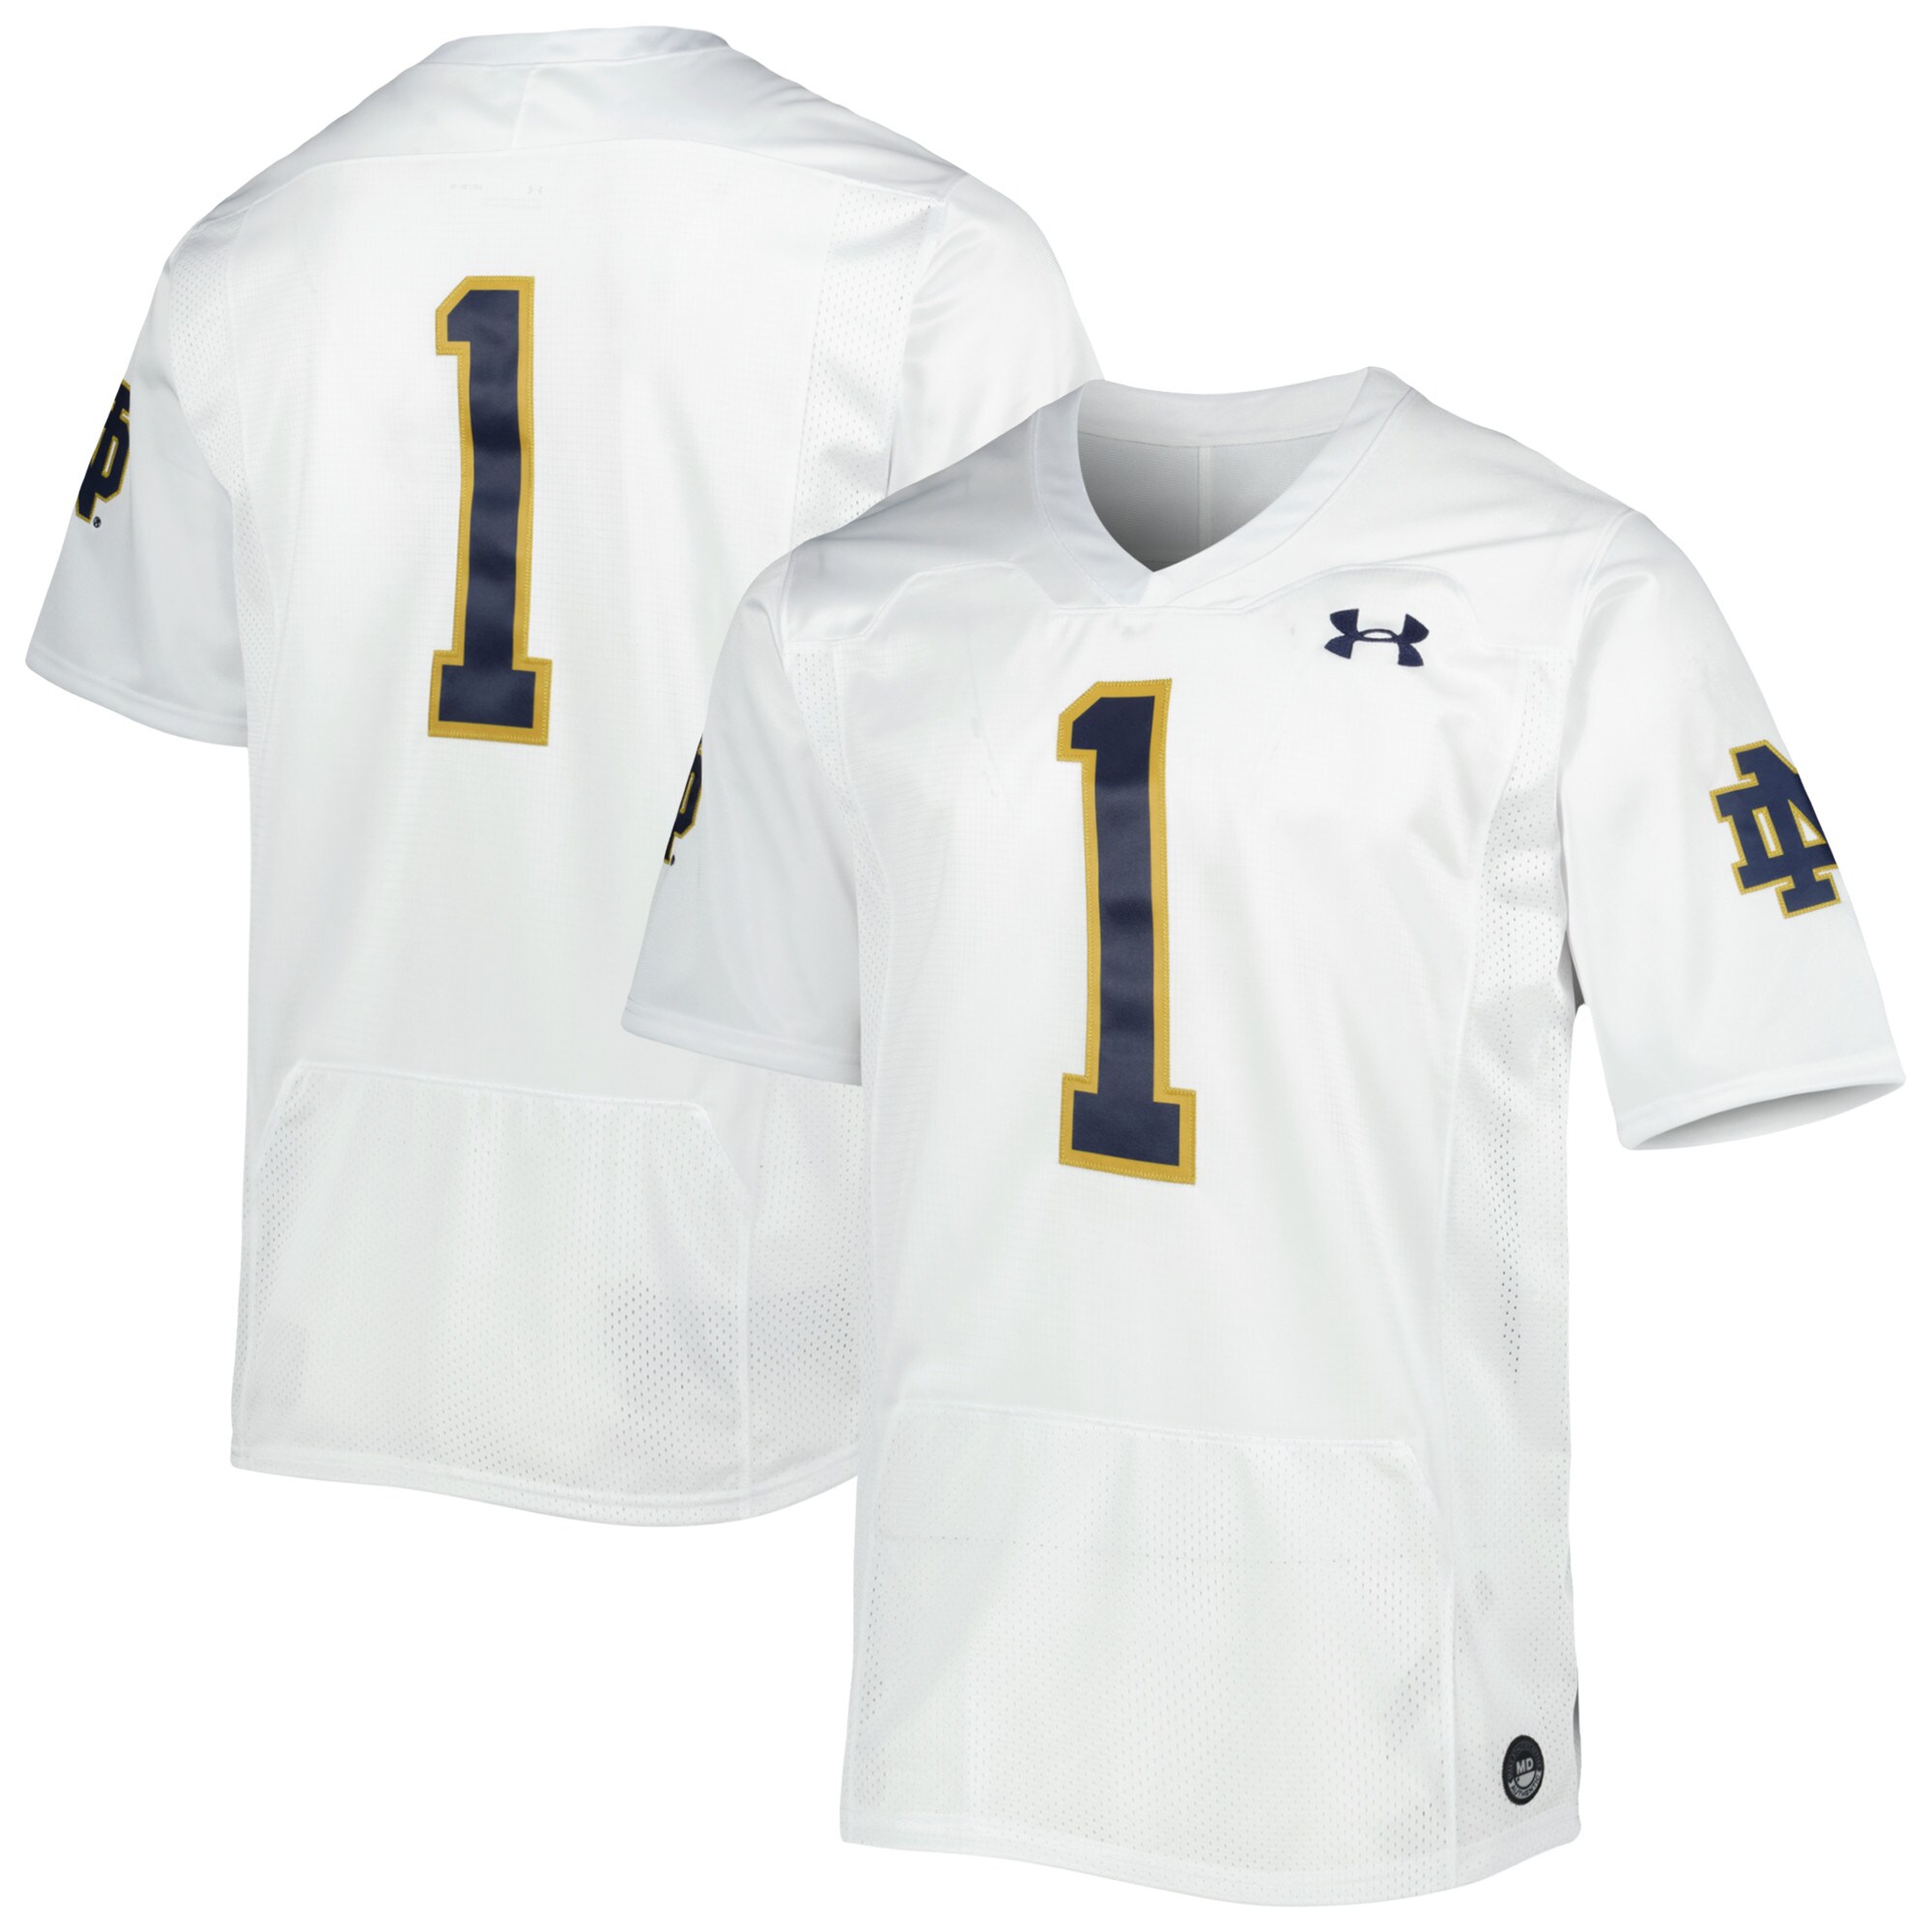 #1 Notre Dame Fighting Irish Under Armour Premier Limited Jersey - White For Youth Women Men